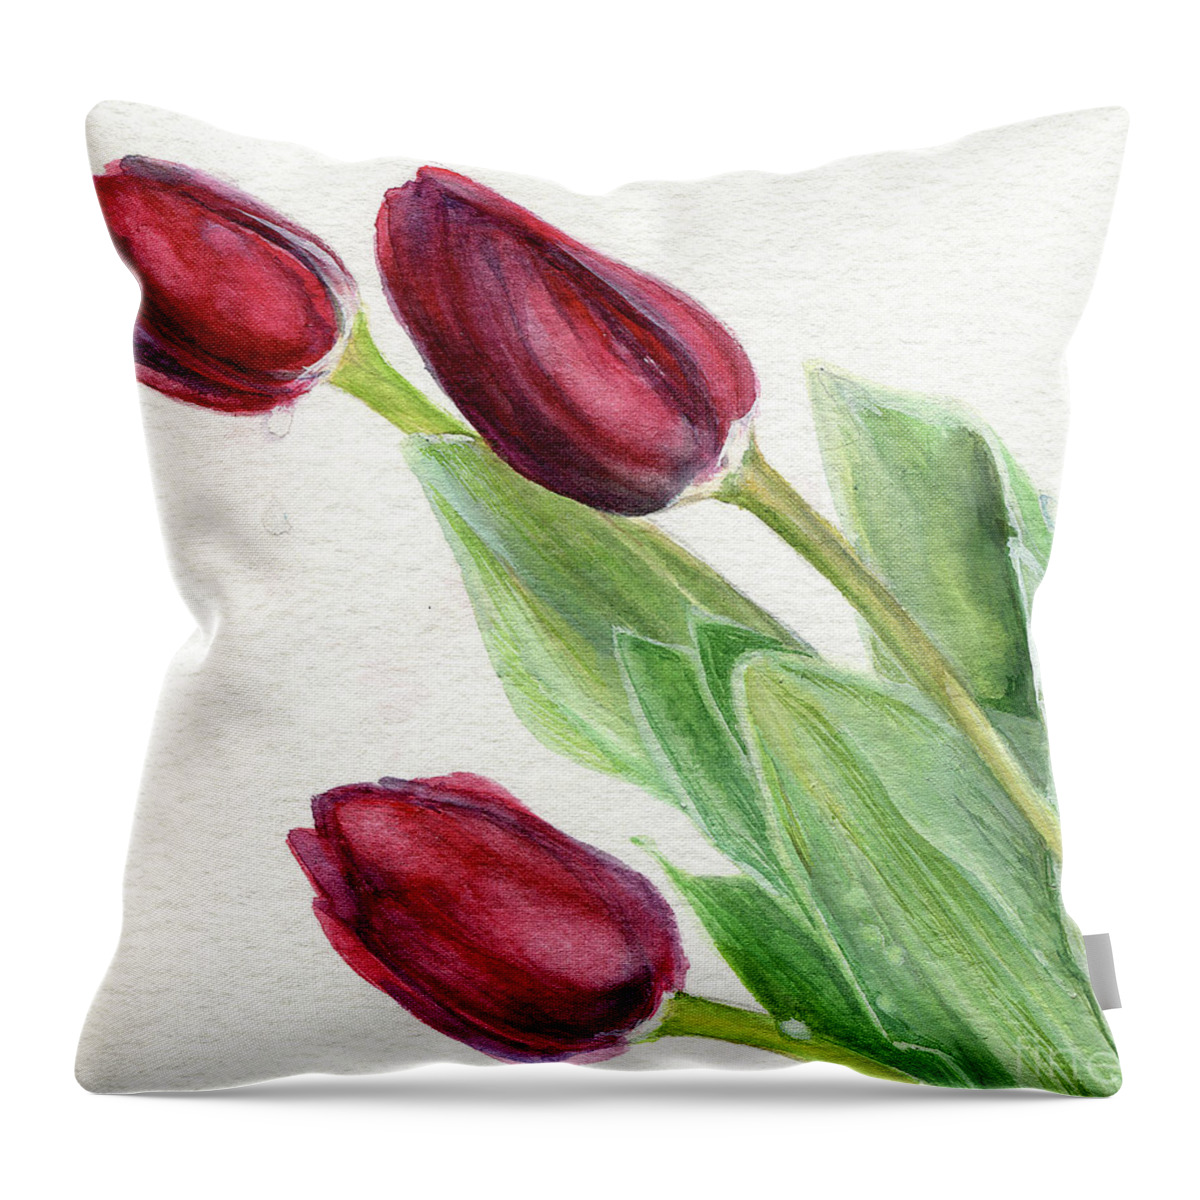 Tulips Throw Pillow featuring the painting Burgundy Tulips by Laurie Rohner